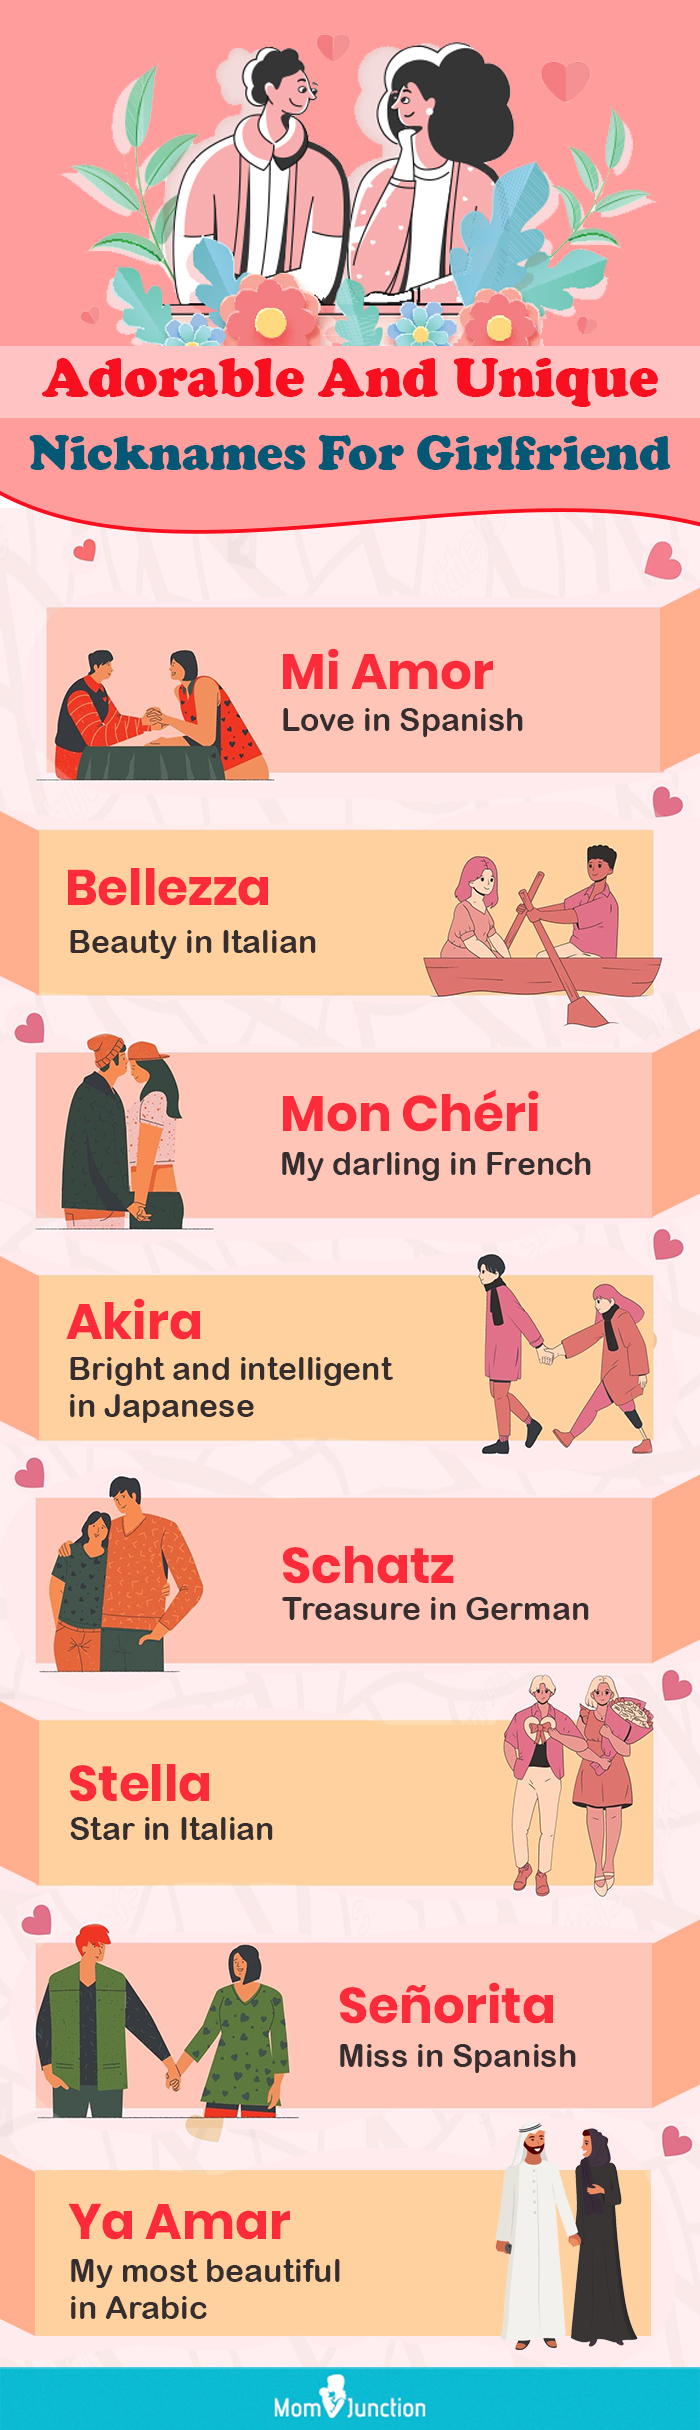 unique nicknames for girlfriend (infographic)